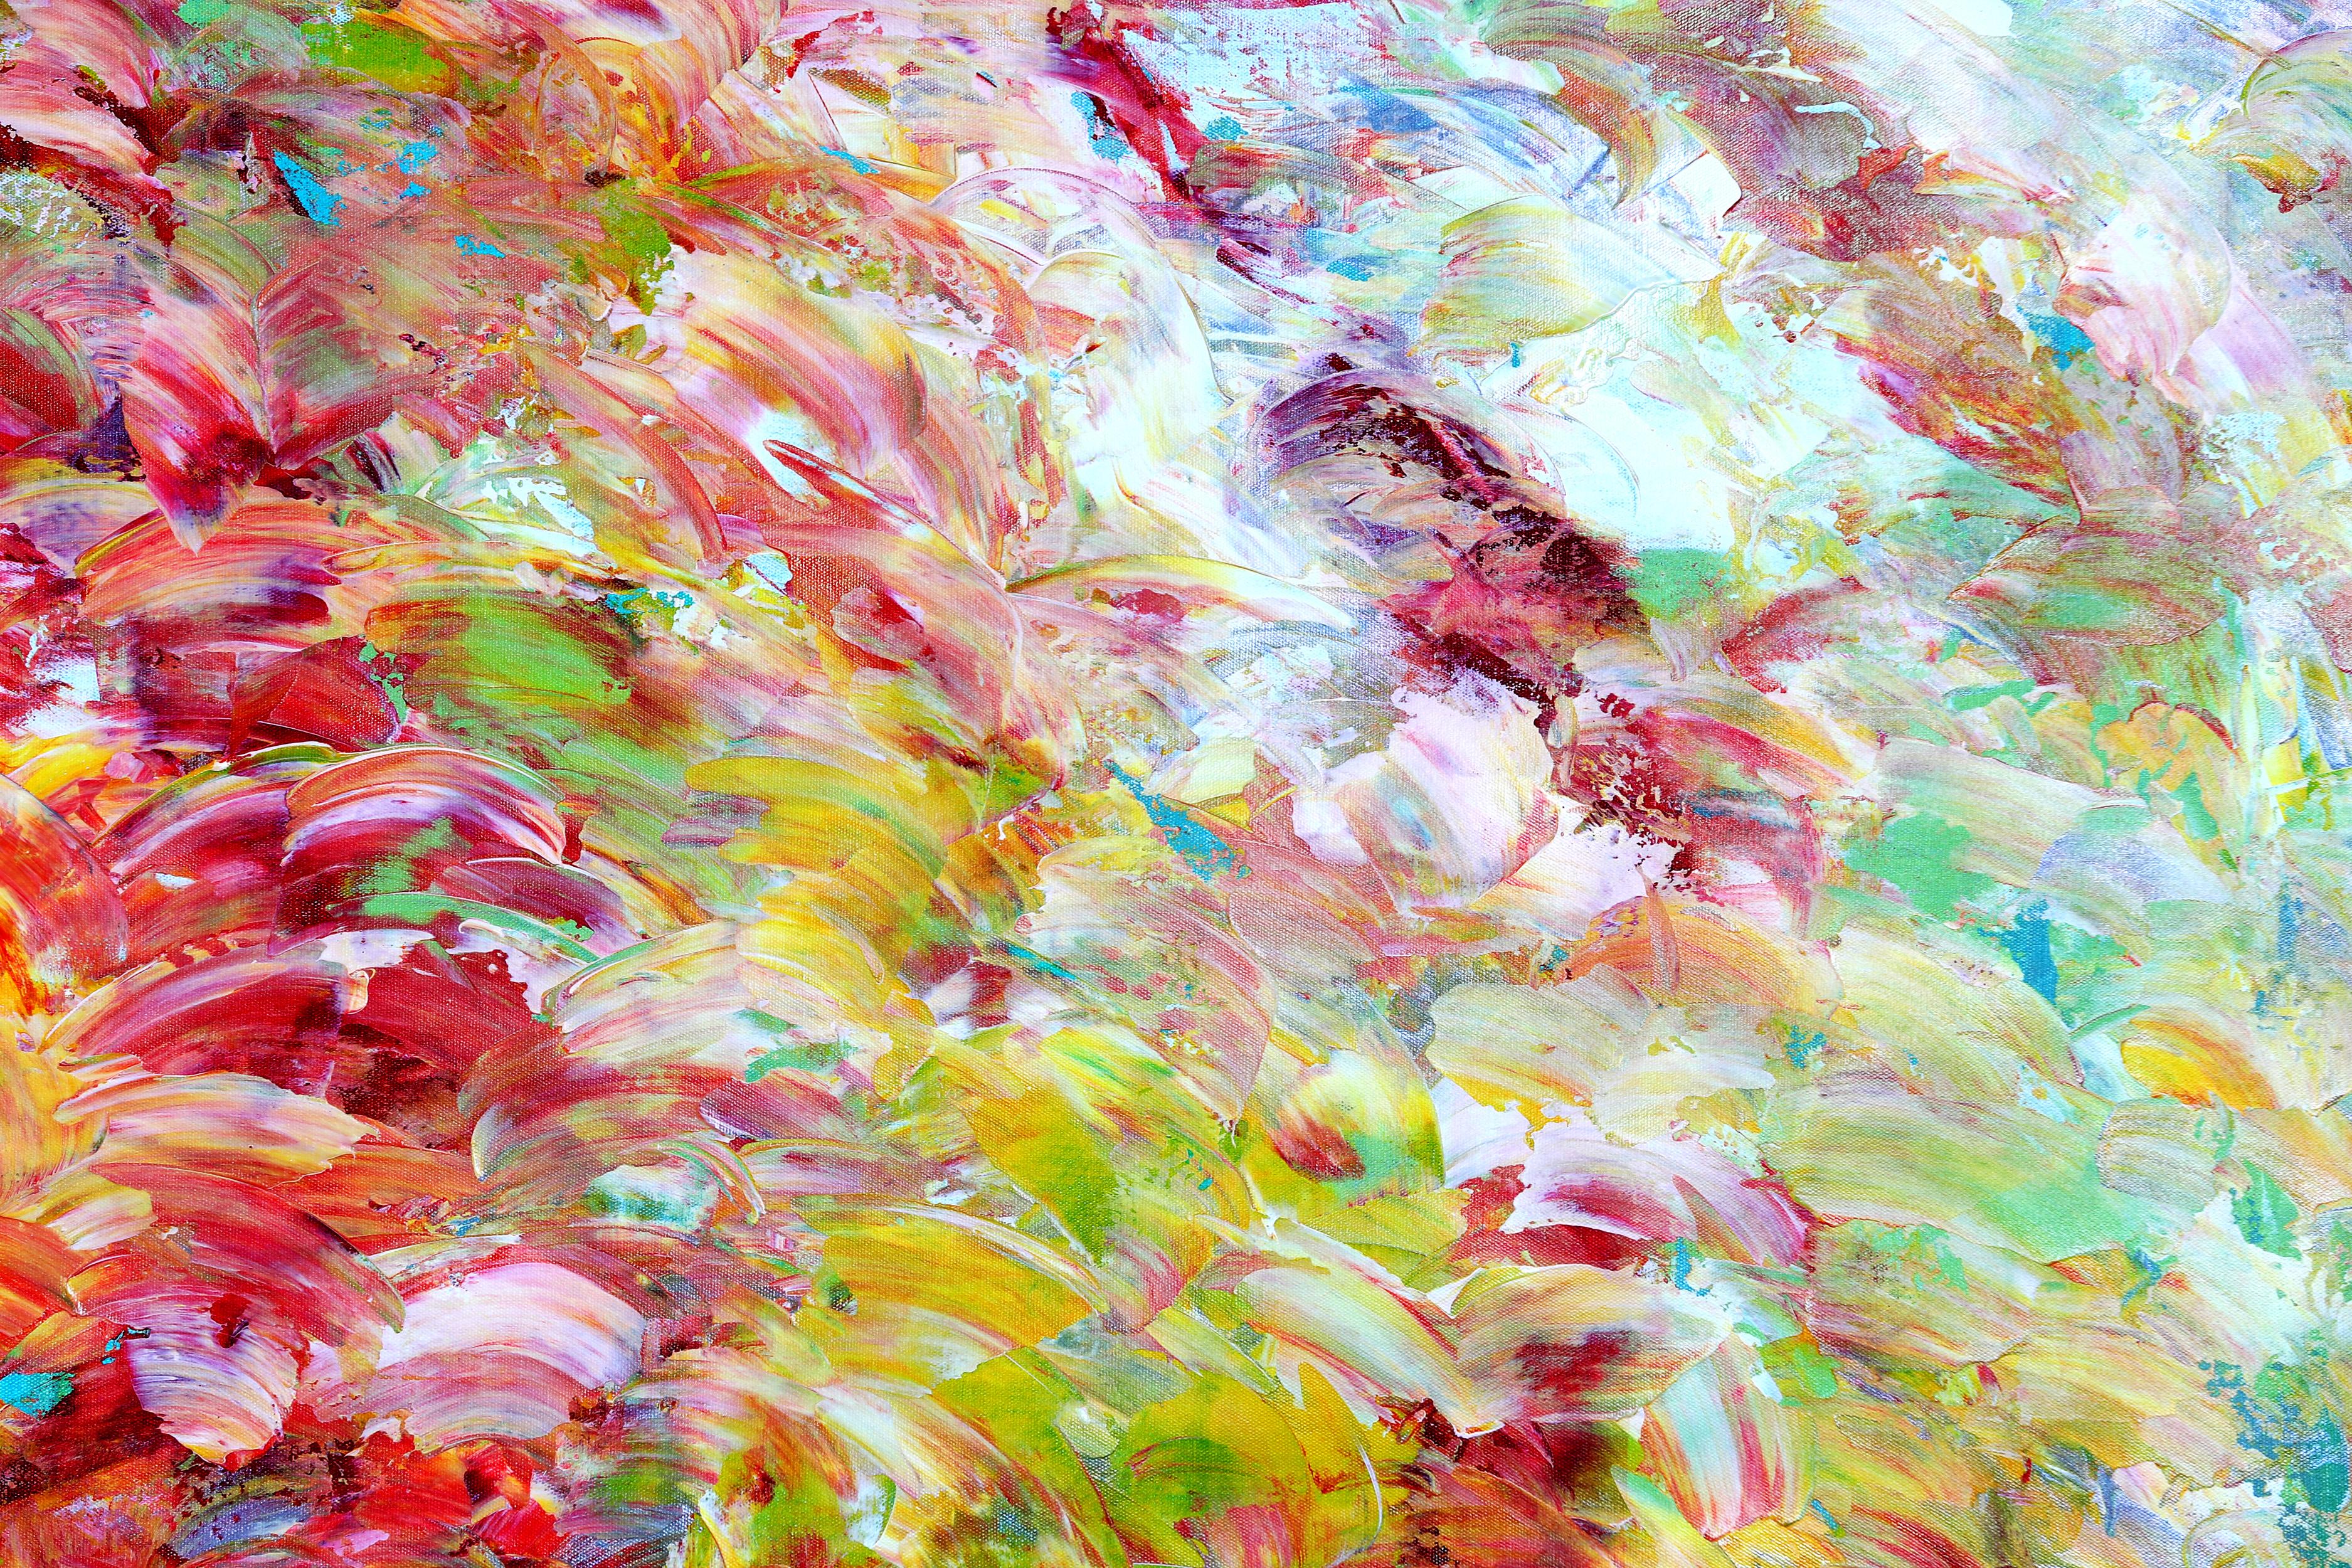 Evolving Colourscape  - Abstract Expressionist Painting by Estelle Asmodelle